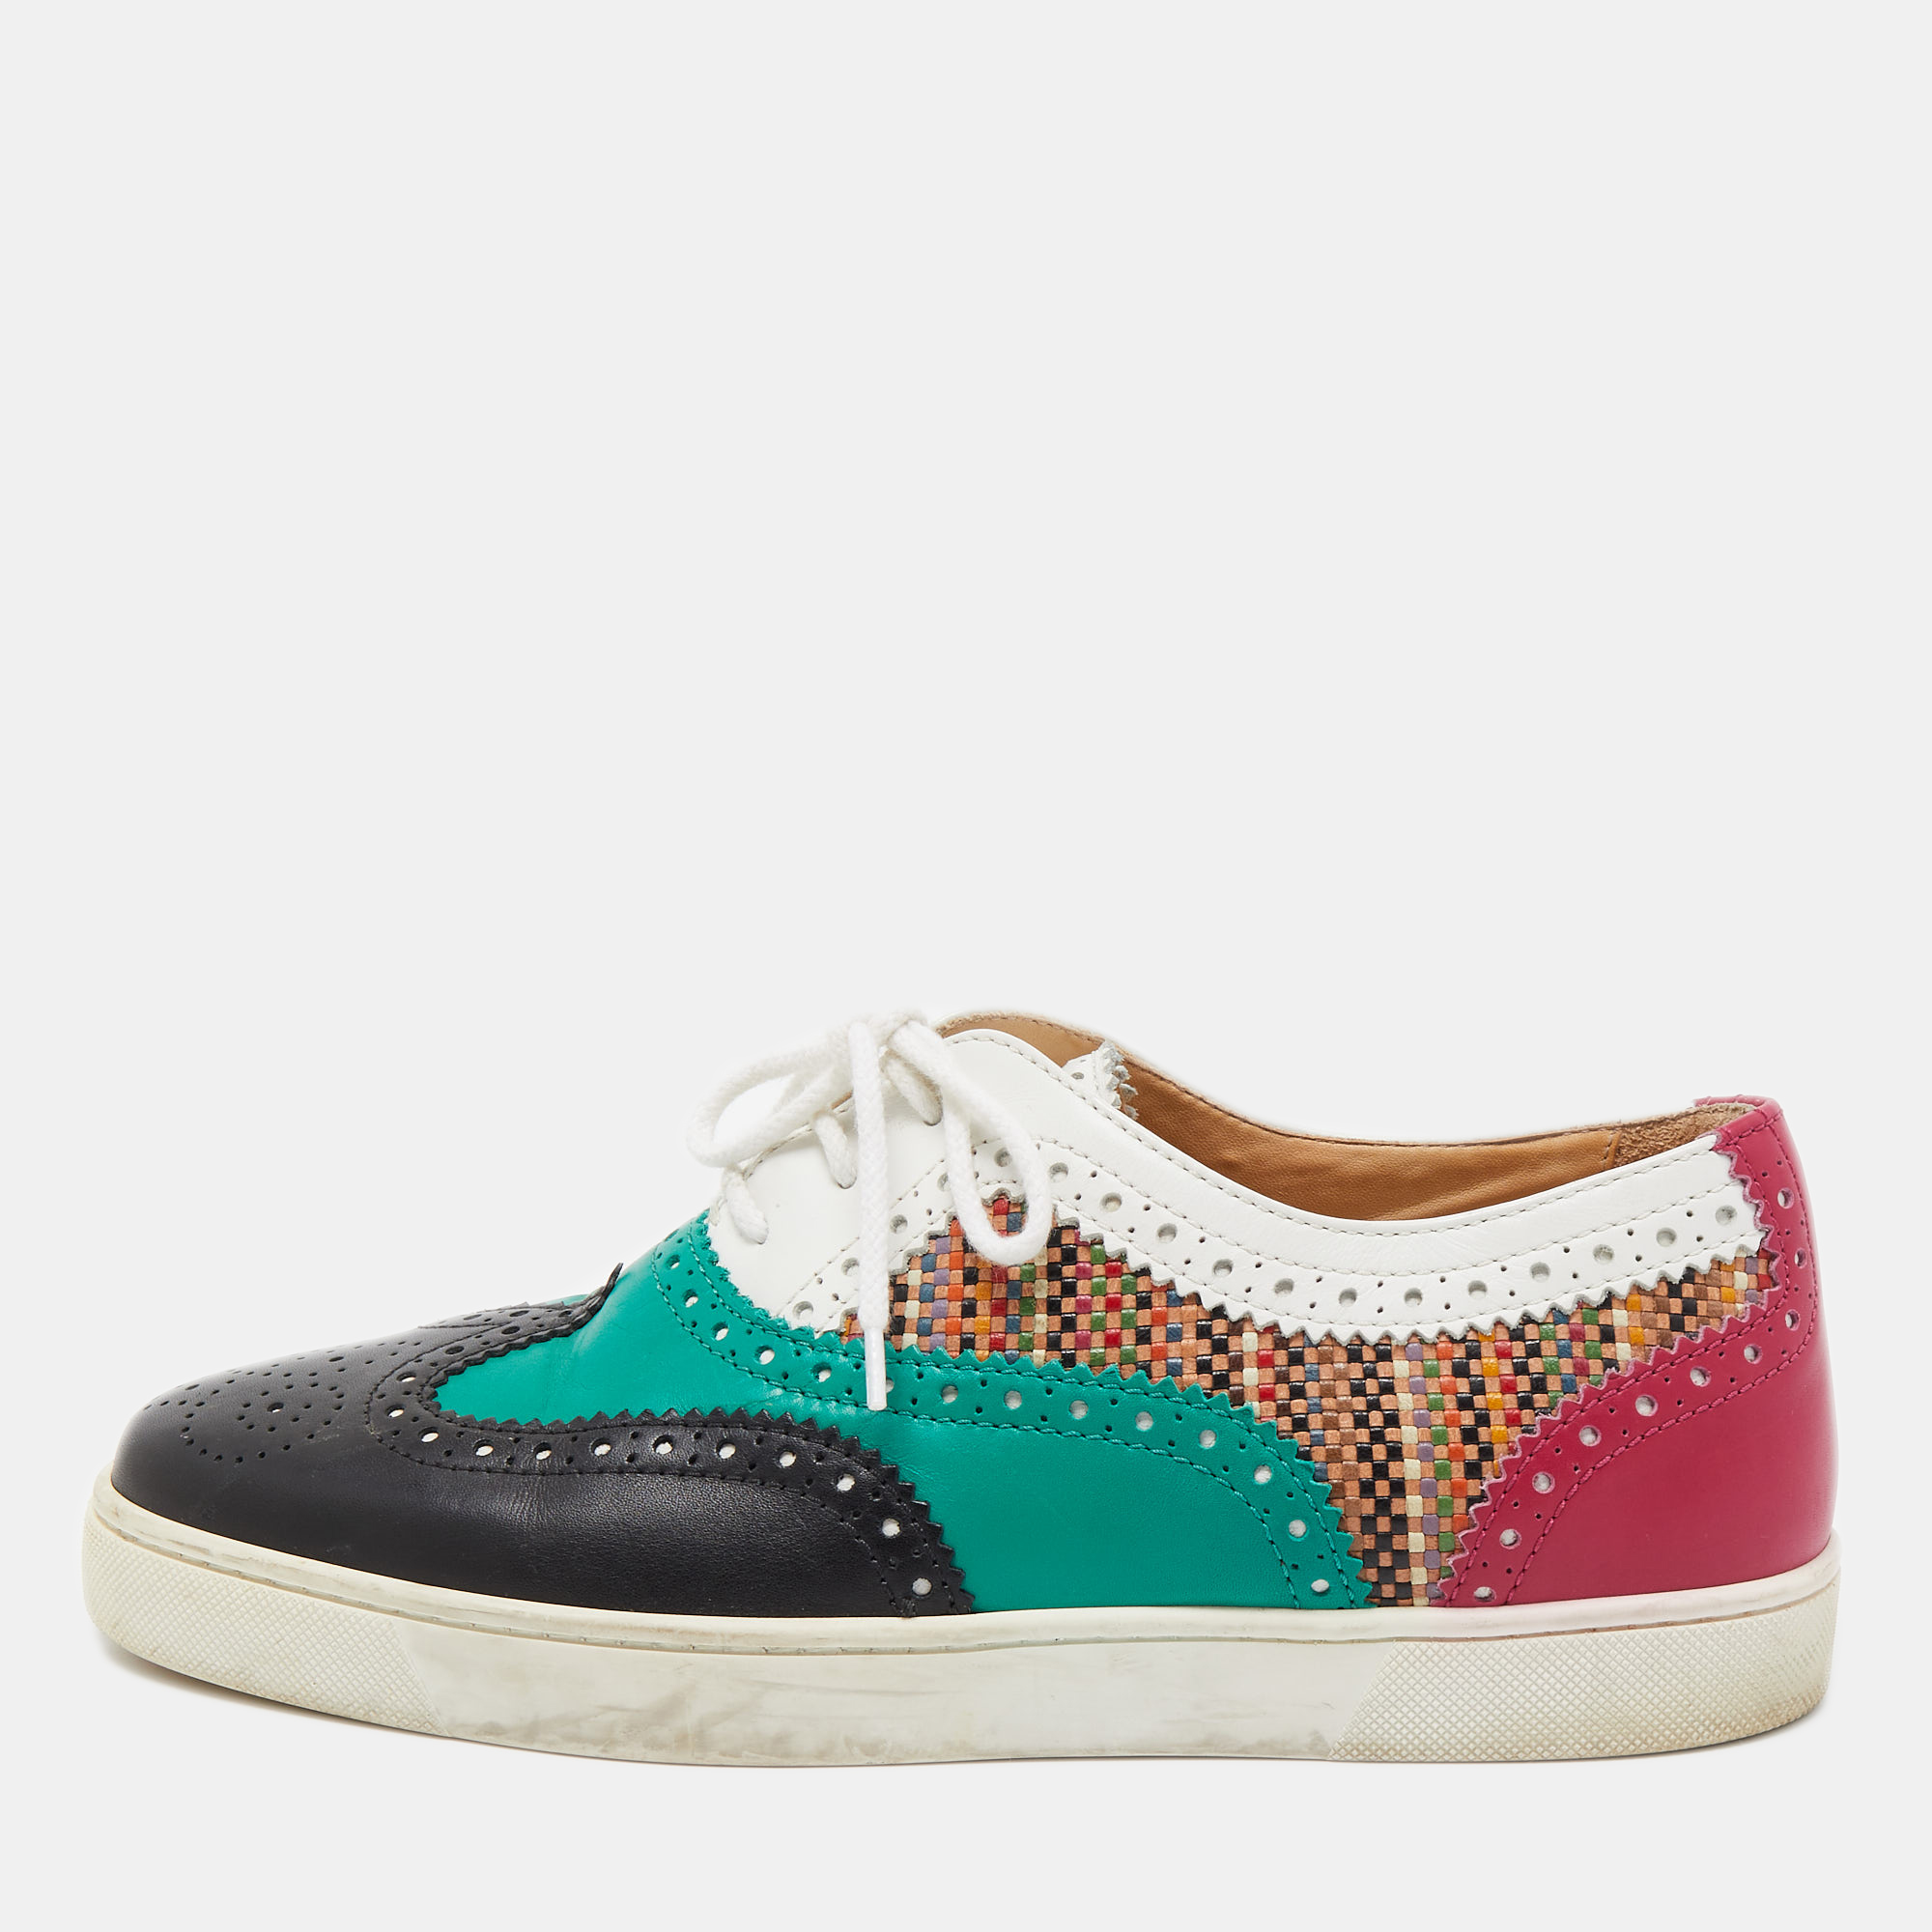 Pre-owned Christian Louboutin Multicolor Leather Oxford Sneakers Size 43